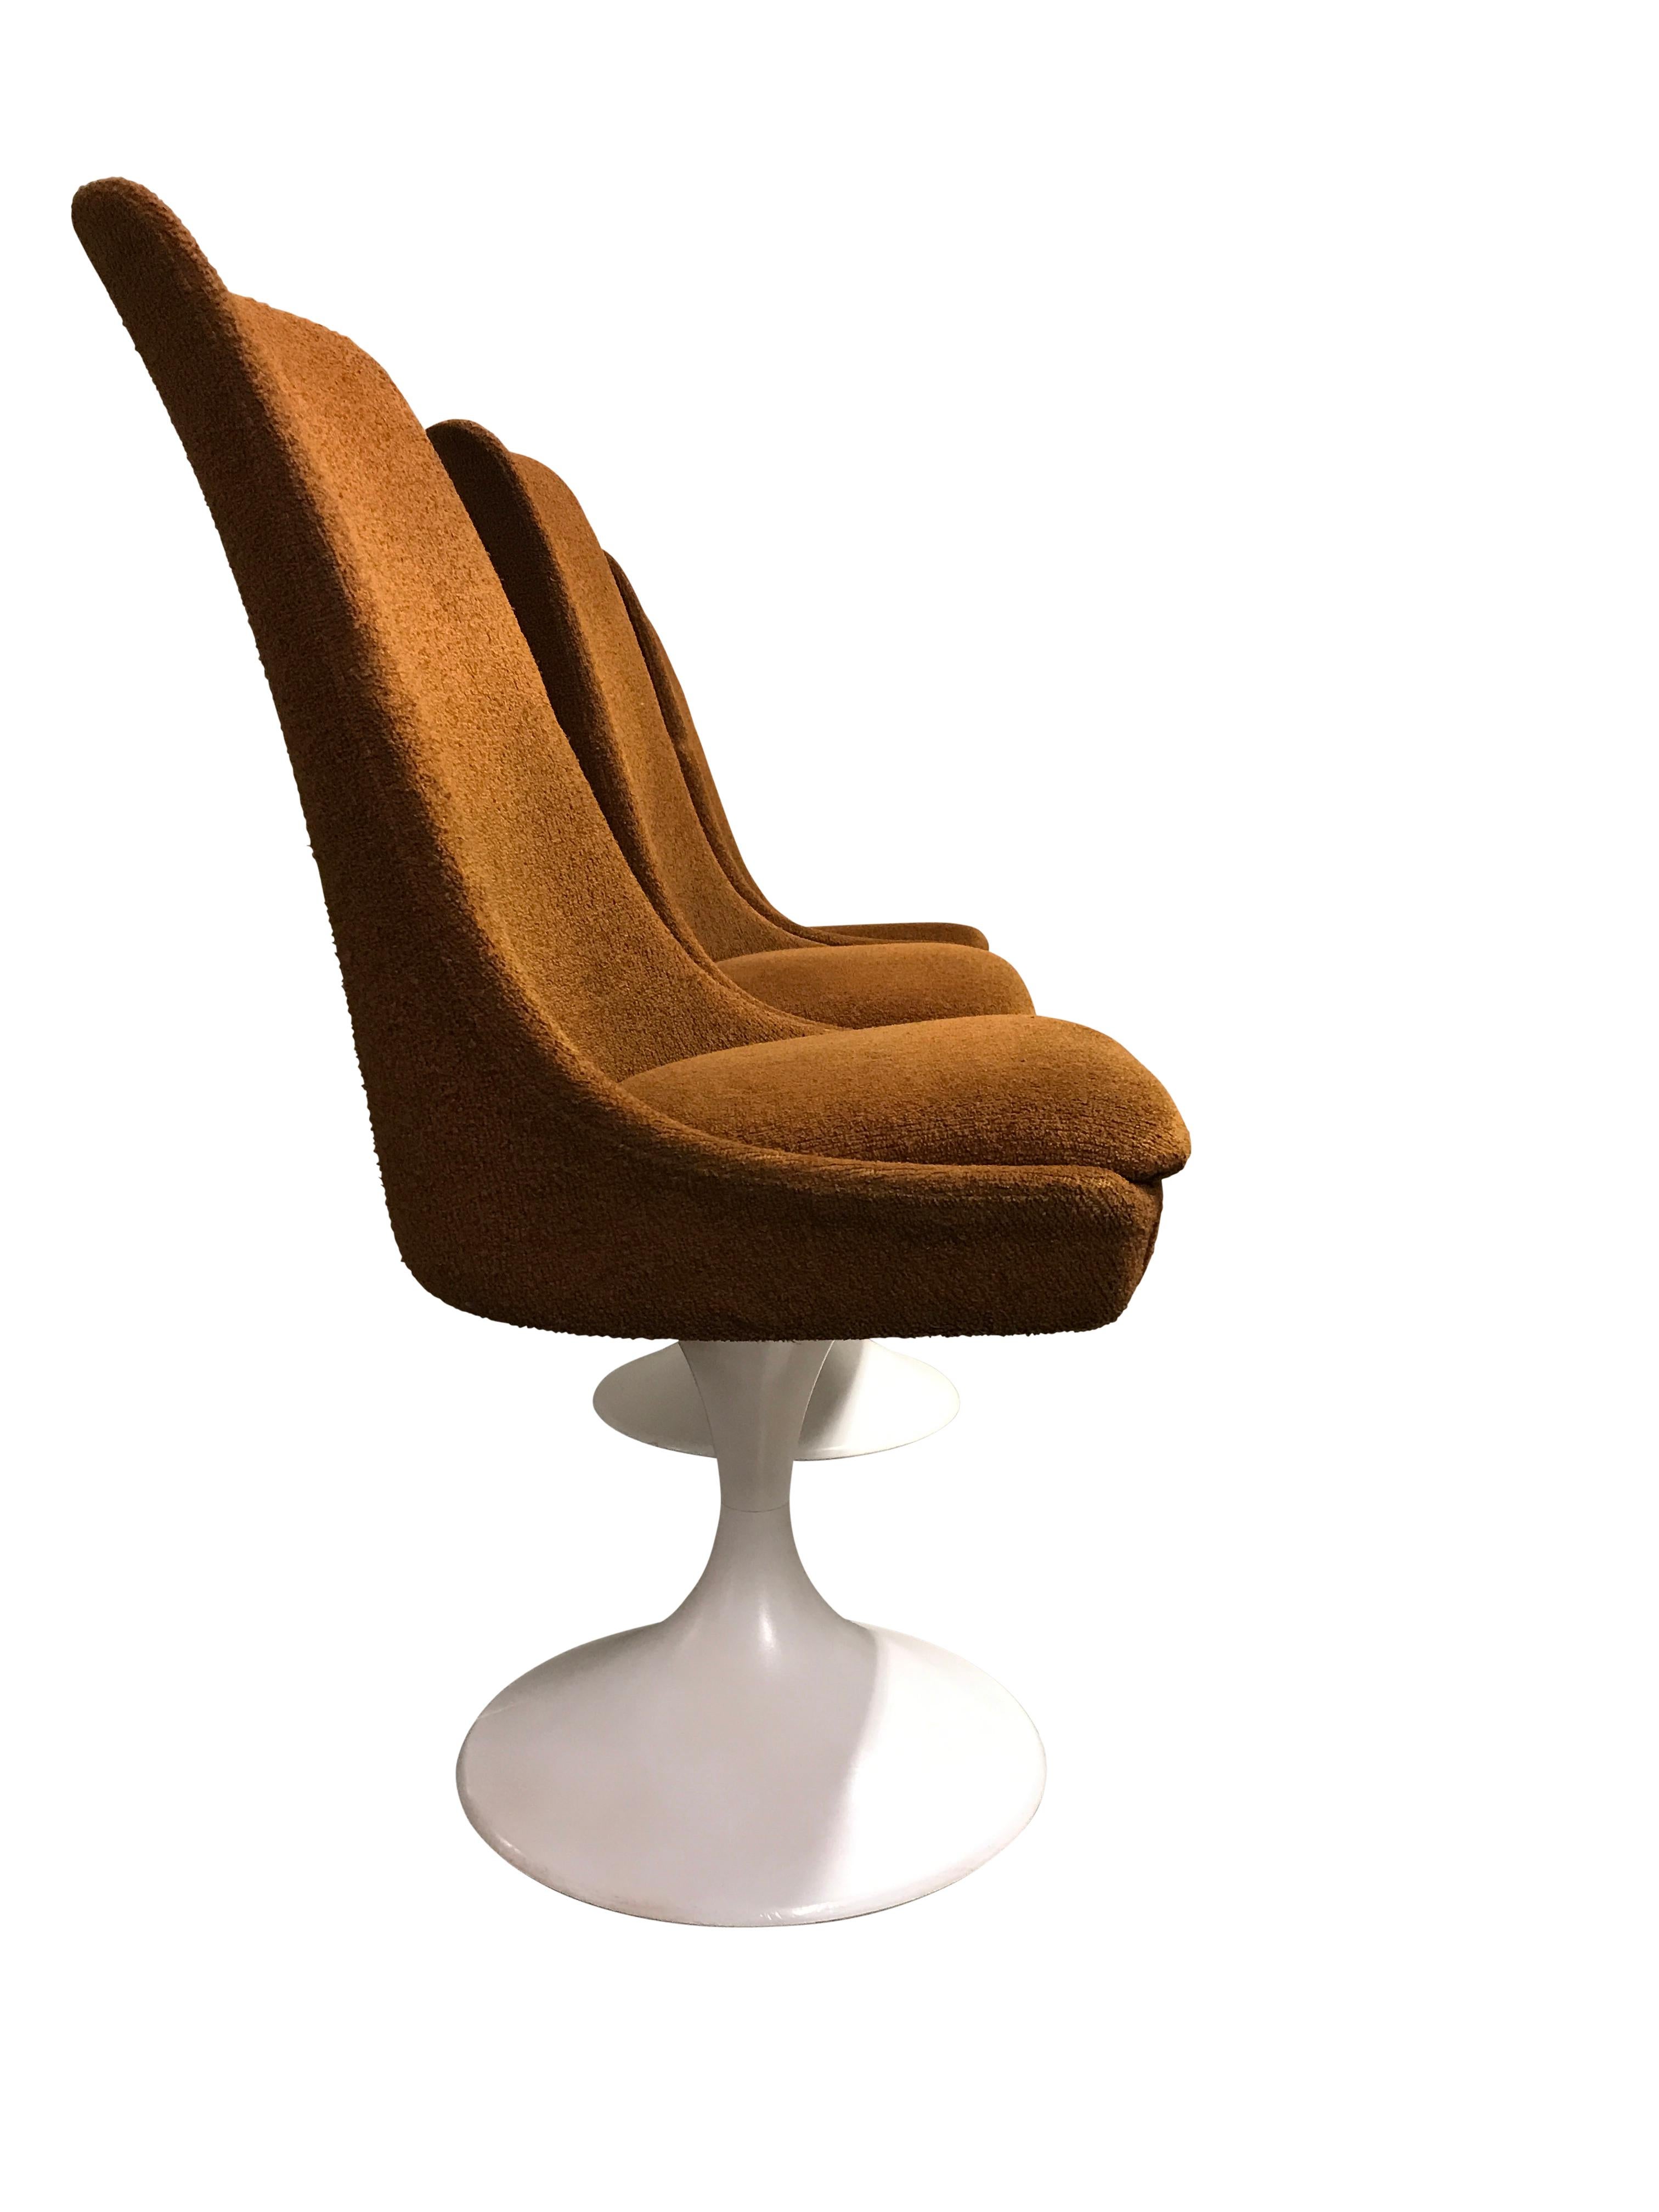 Fabric Vintage Space Age Dining Chairs, 1960s